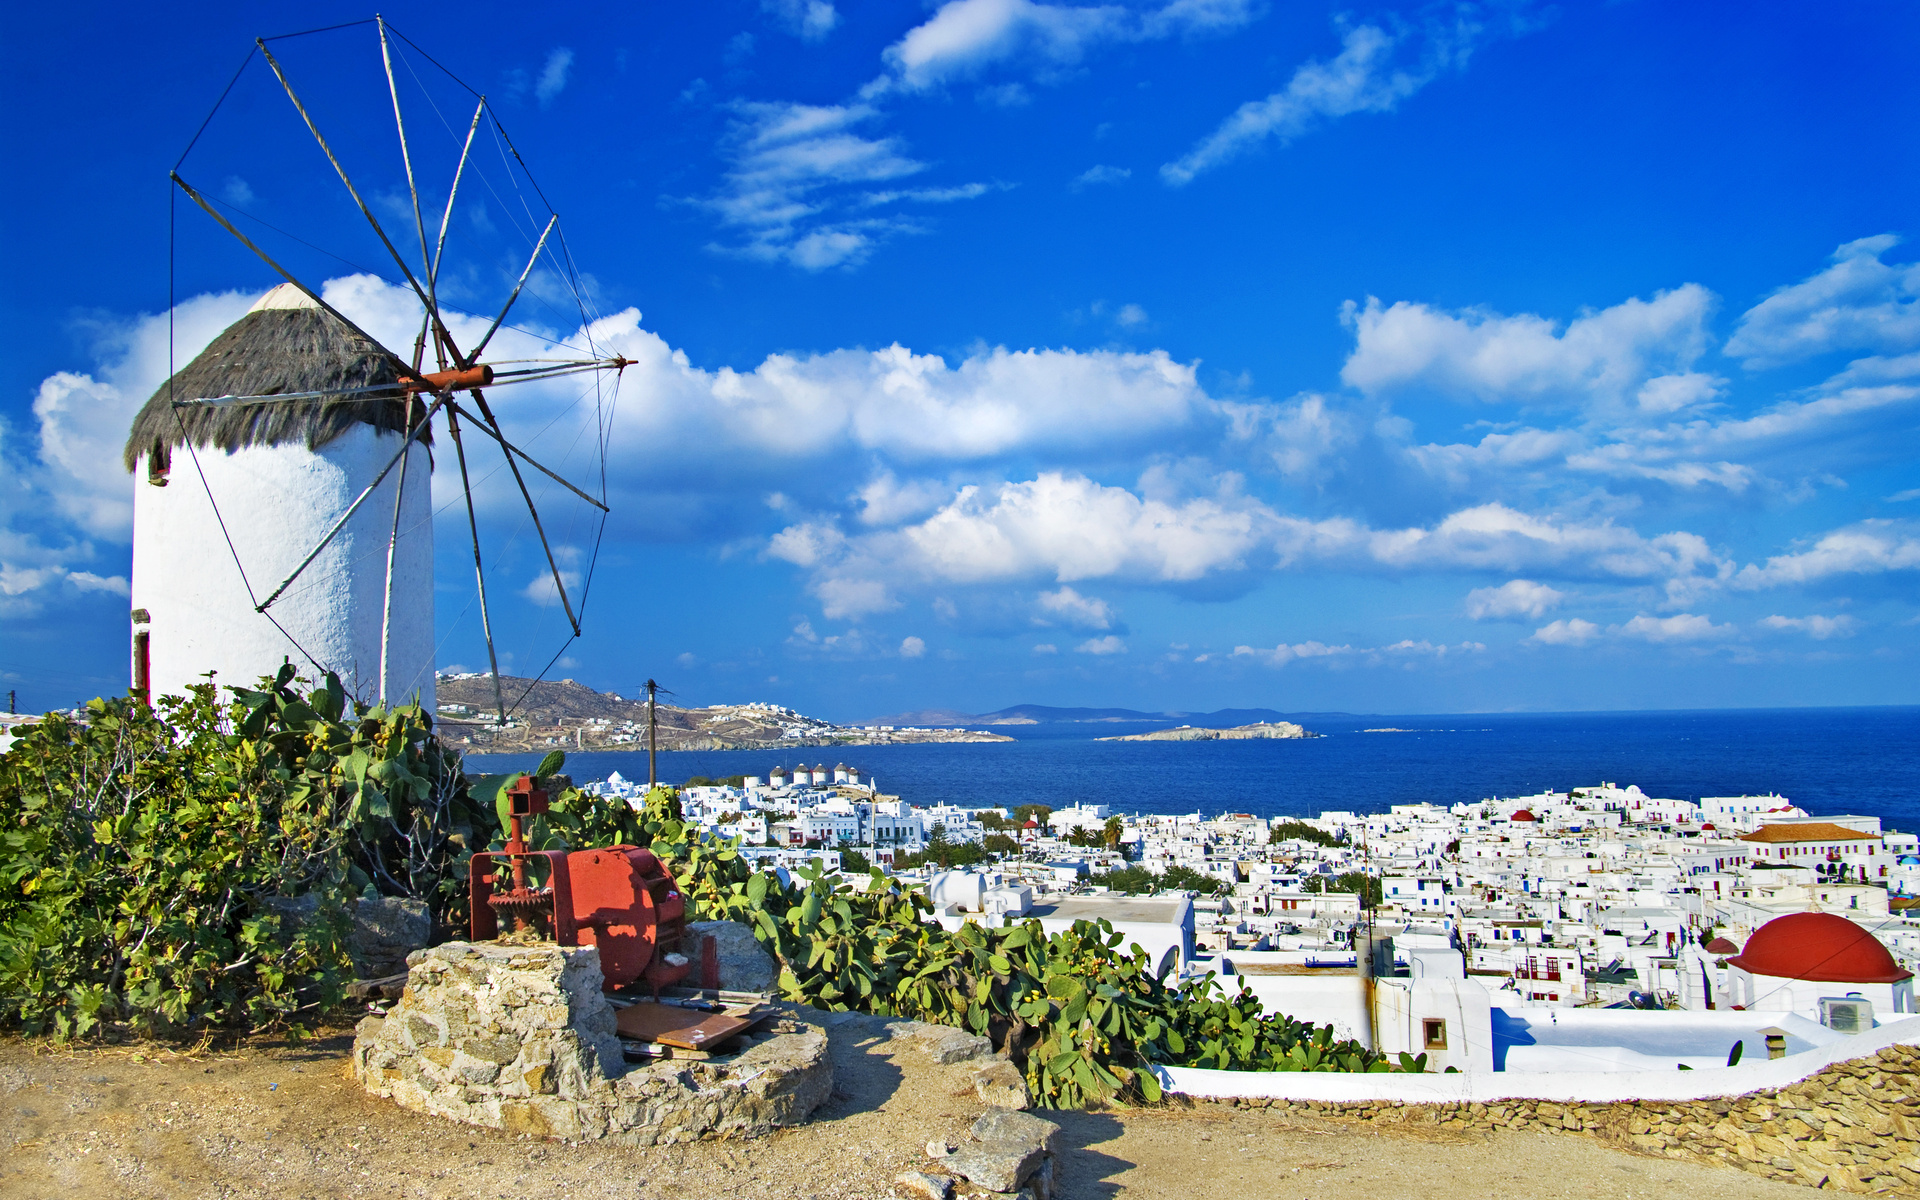 sea, style, mykonos, sunny, romantic, hotel, hill, man made, city, aegean, architecture, blue, building, church, culture, cute, cyclades, cycladic, europe, greece, greek, holiday, house, island, landscape, mountain, nature, resort, restaurant, roof, santorini, sky, summer, touristic, town, tropical, white, windmill, cities